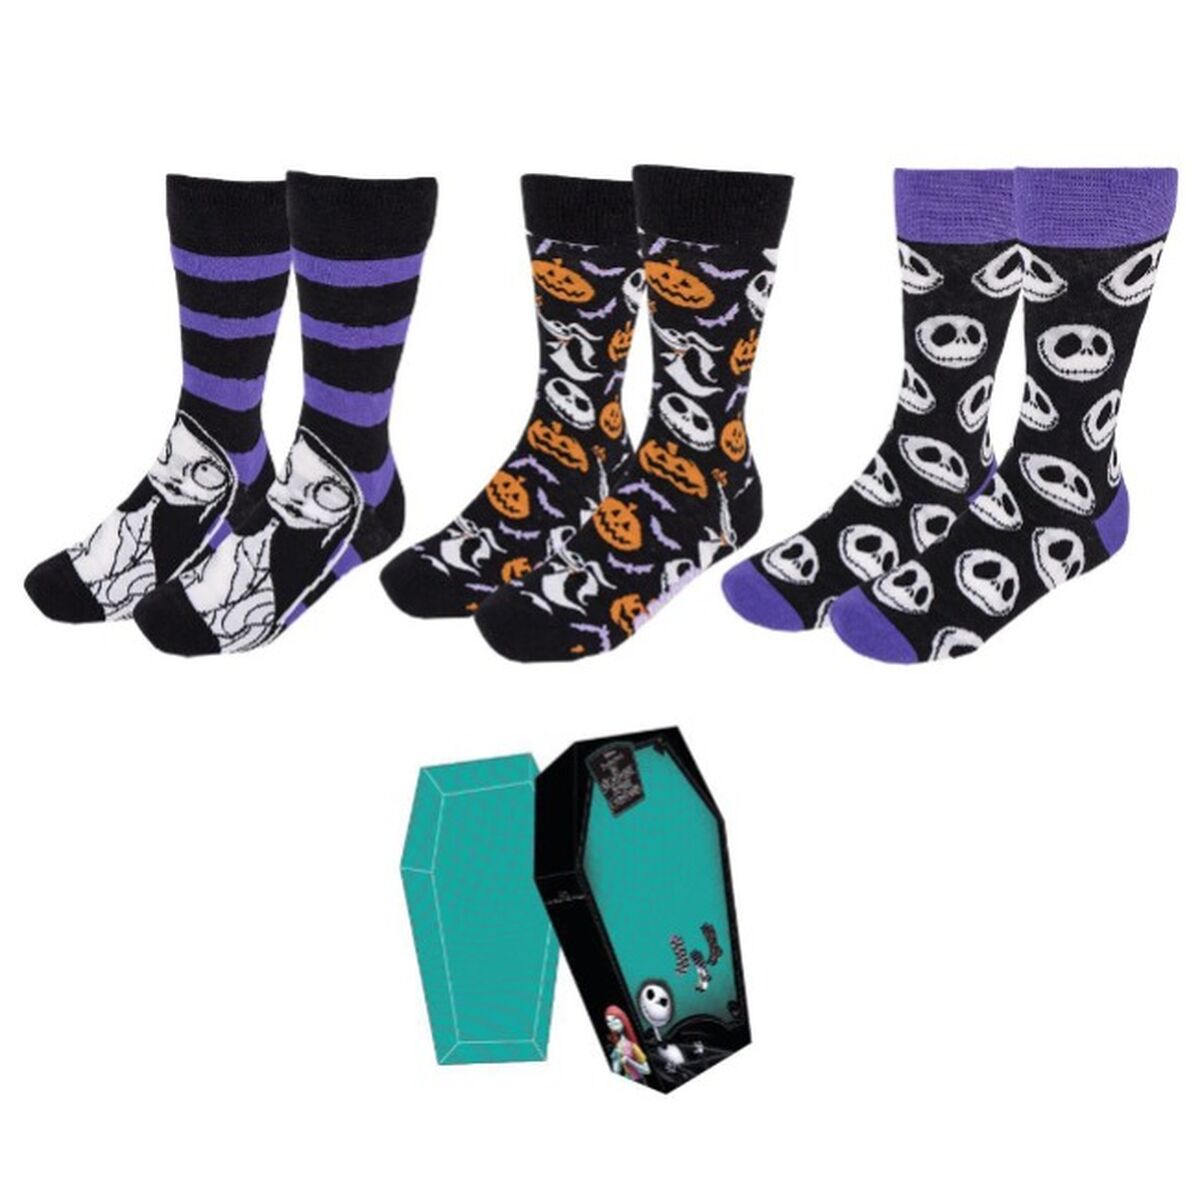 Socks The Nightmare Before Christmas 3 Pieces Multicolour 40-46